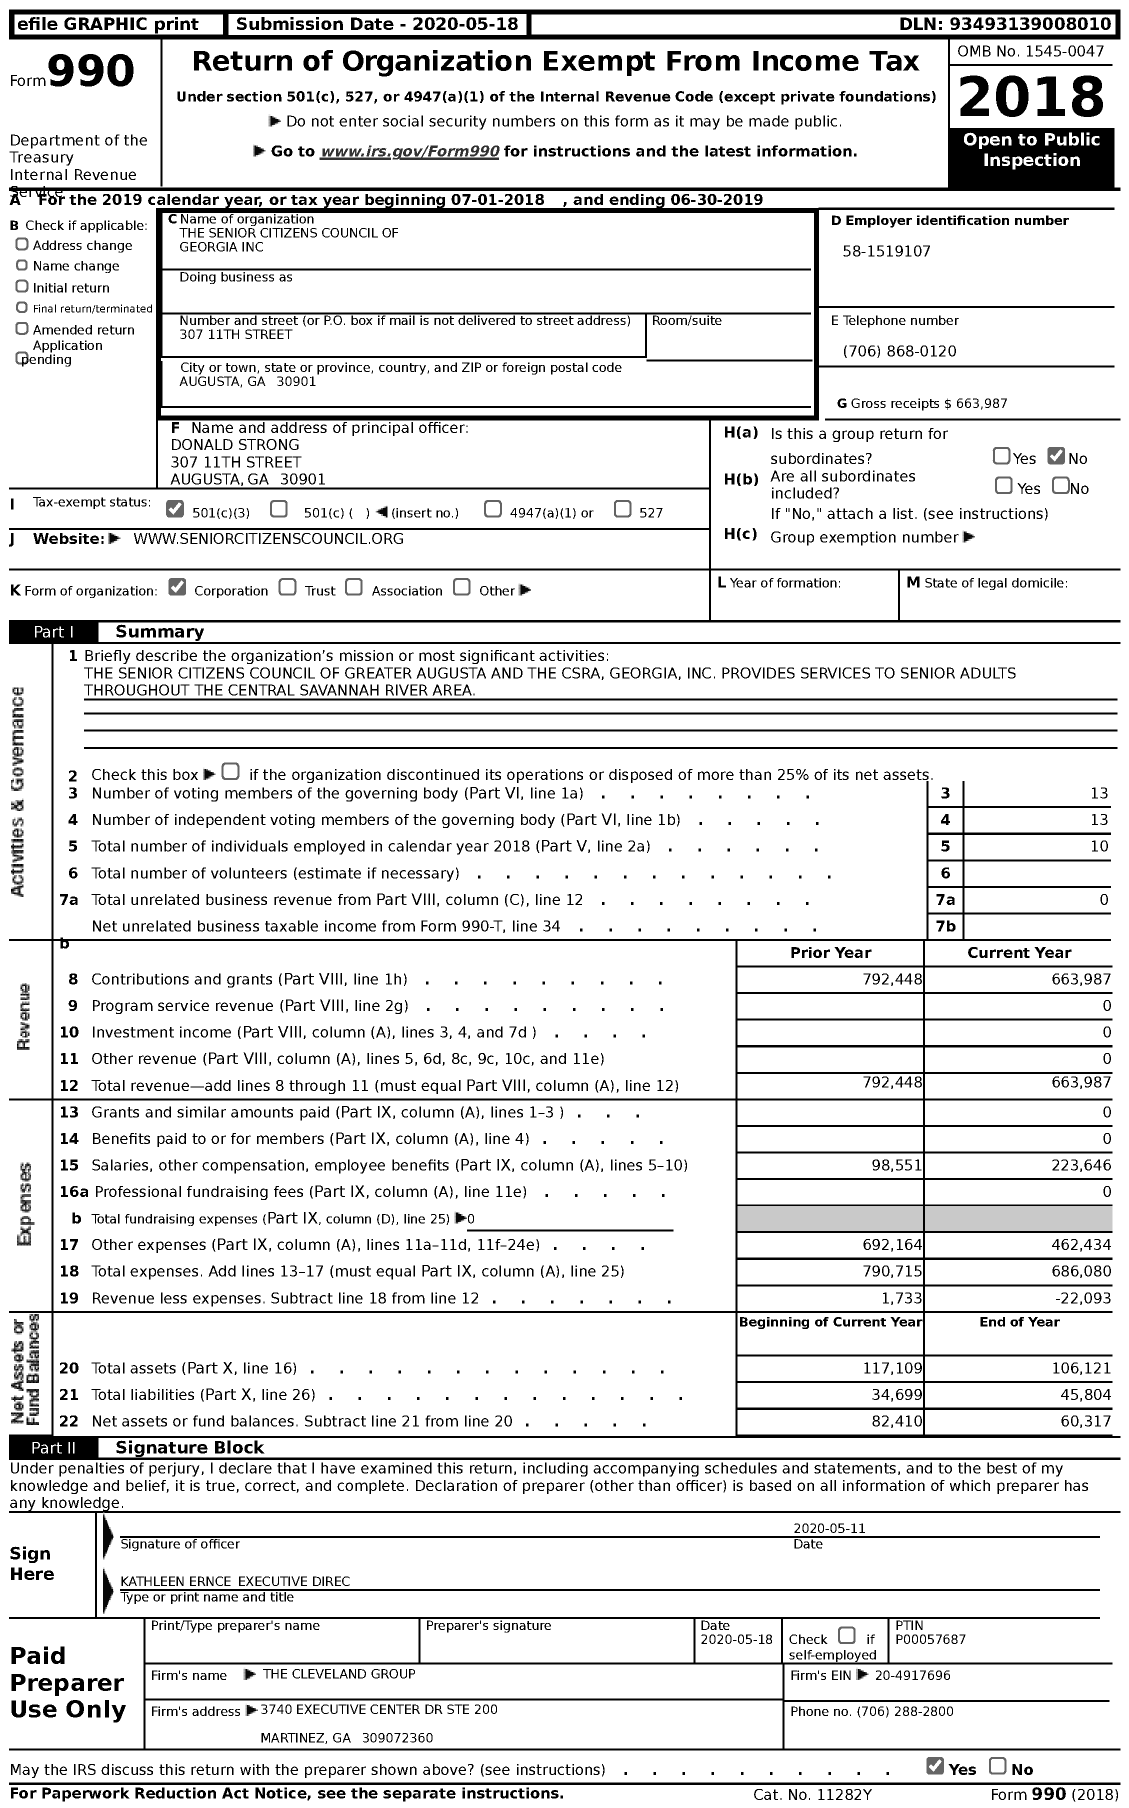 Image of first page of 2018 Form 990 for the Senior Citizens Council of Georgia